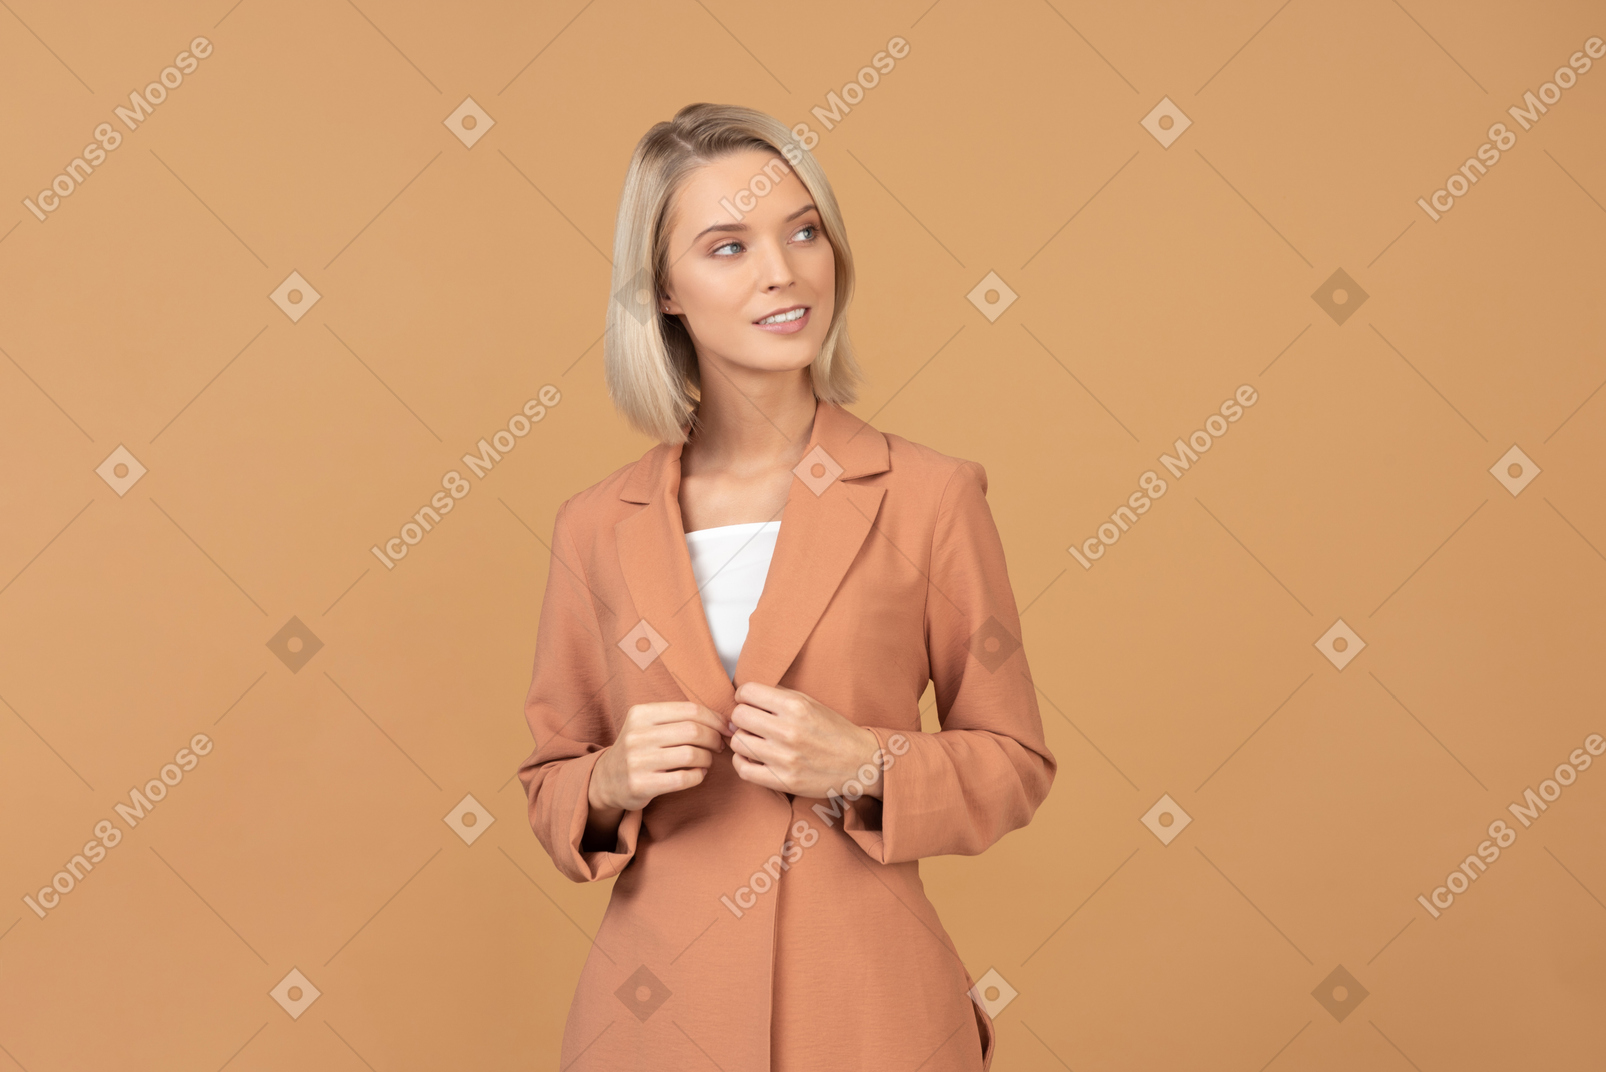 Pensive young woman in terracotta jacket